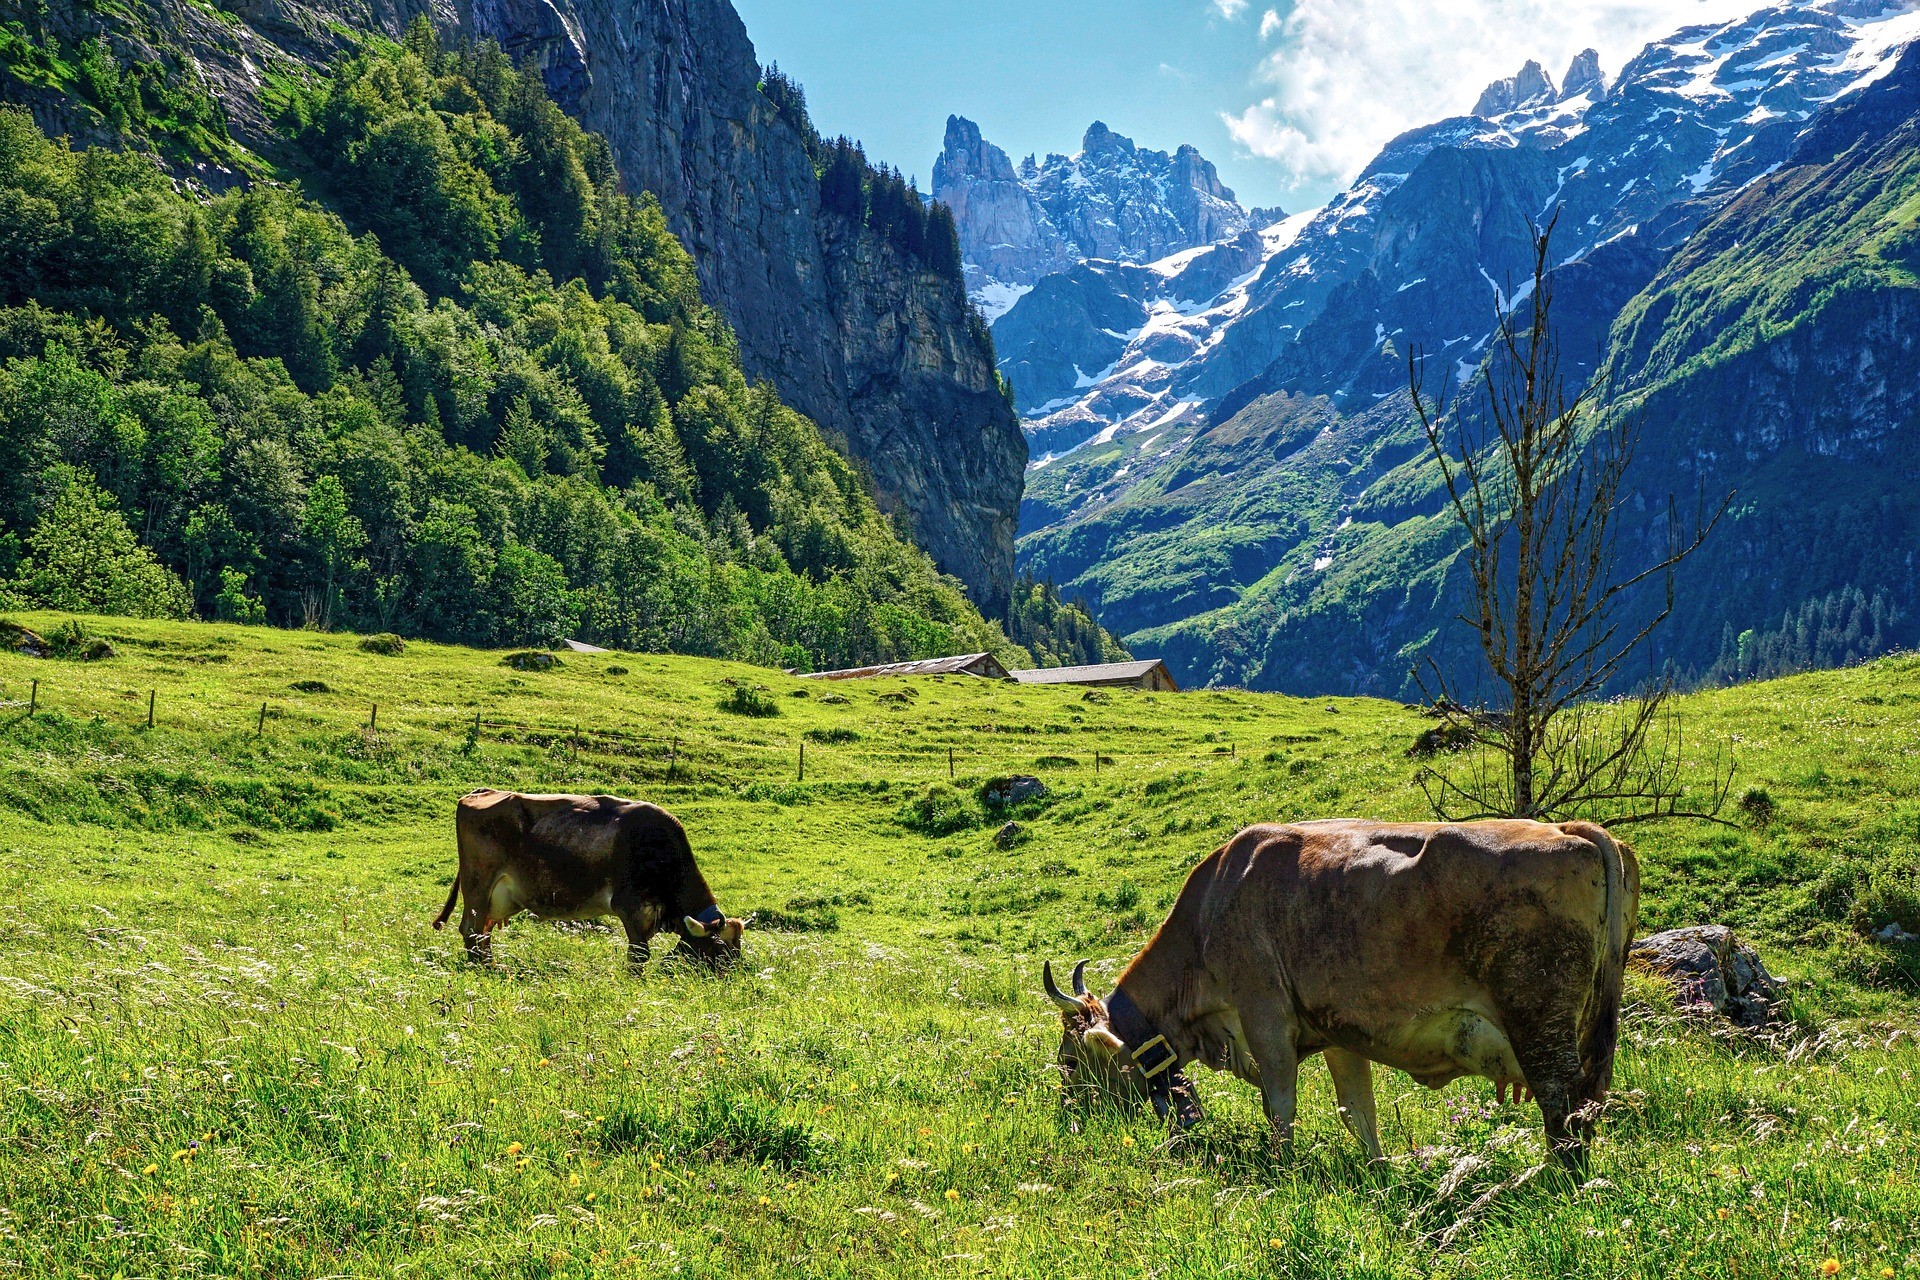 Cows on a pasture in front of high mountains